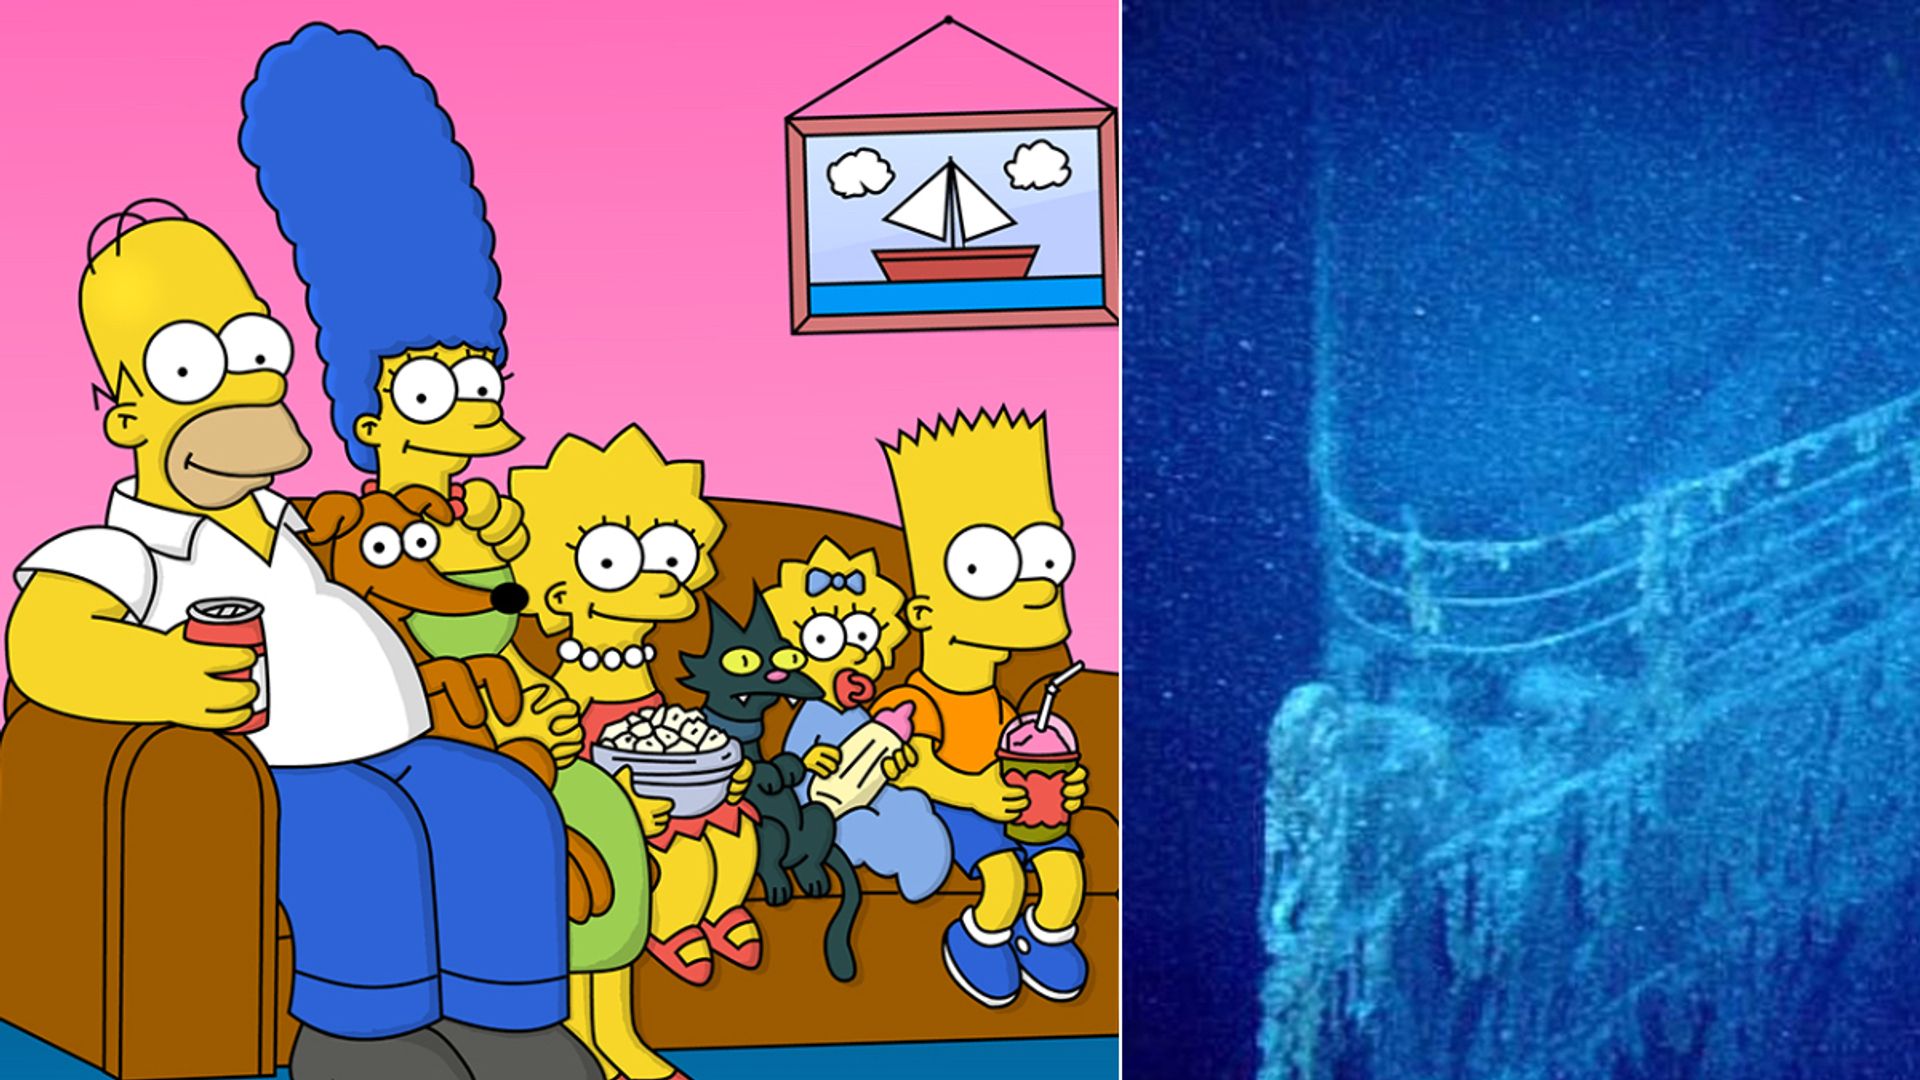 The Simpsons predicting the Titanic submersible disaster